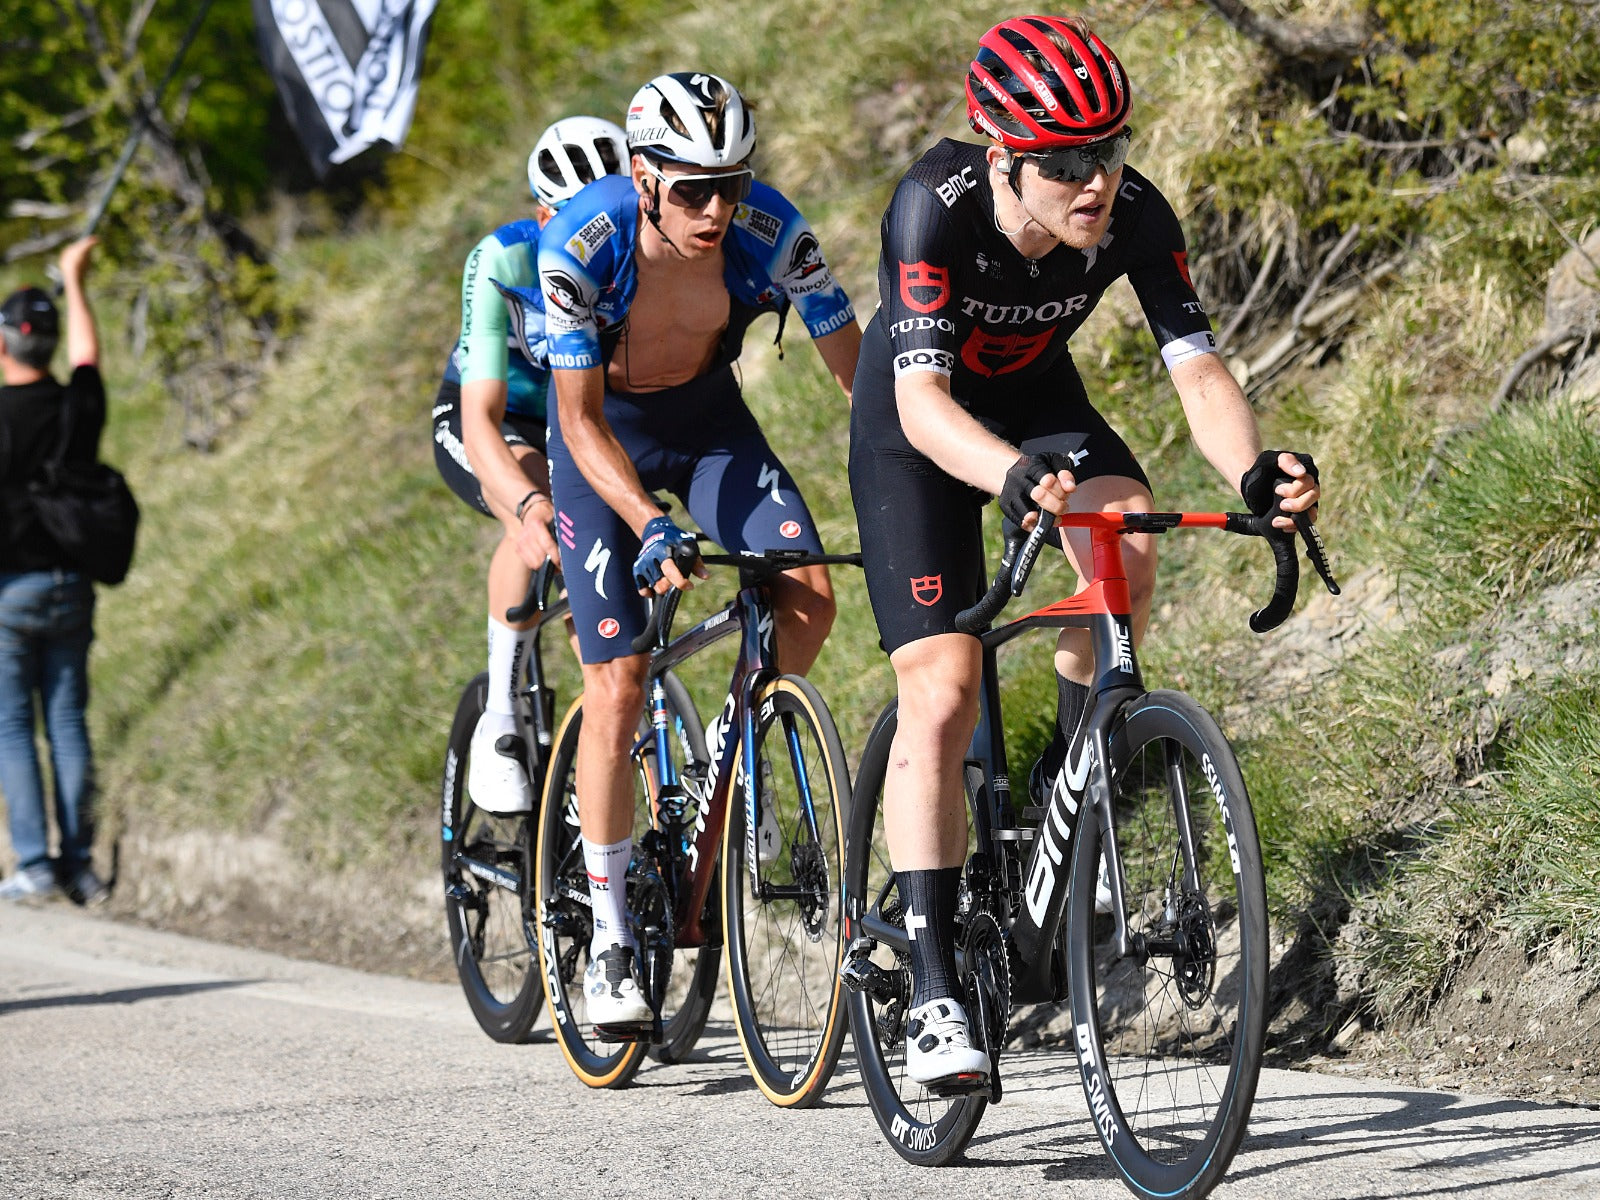 BMC | GC leap for Storer after stage 8 of the Giro, third place for Voisard in Hungary